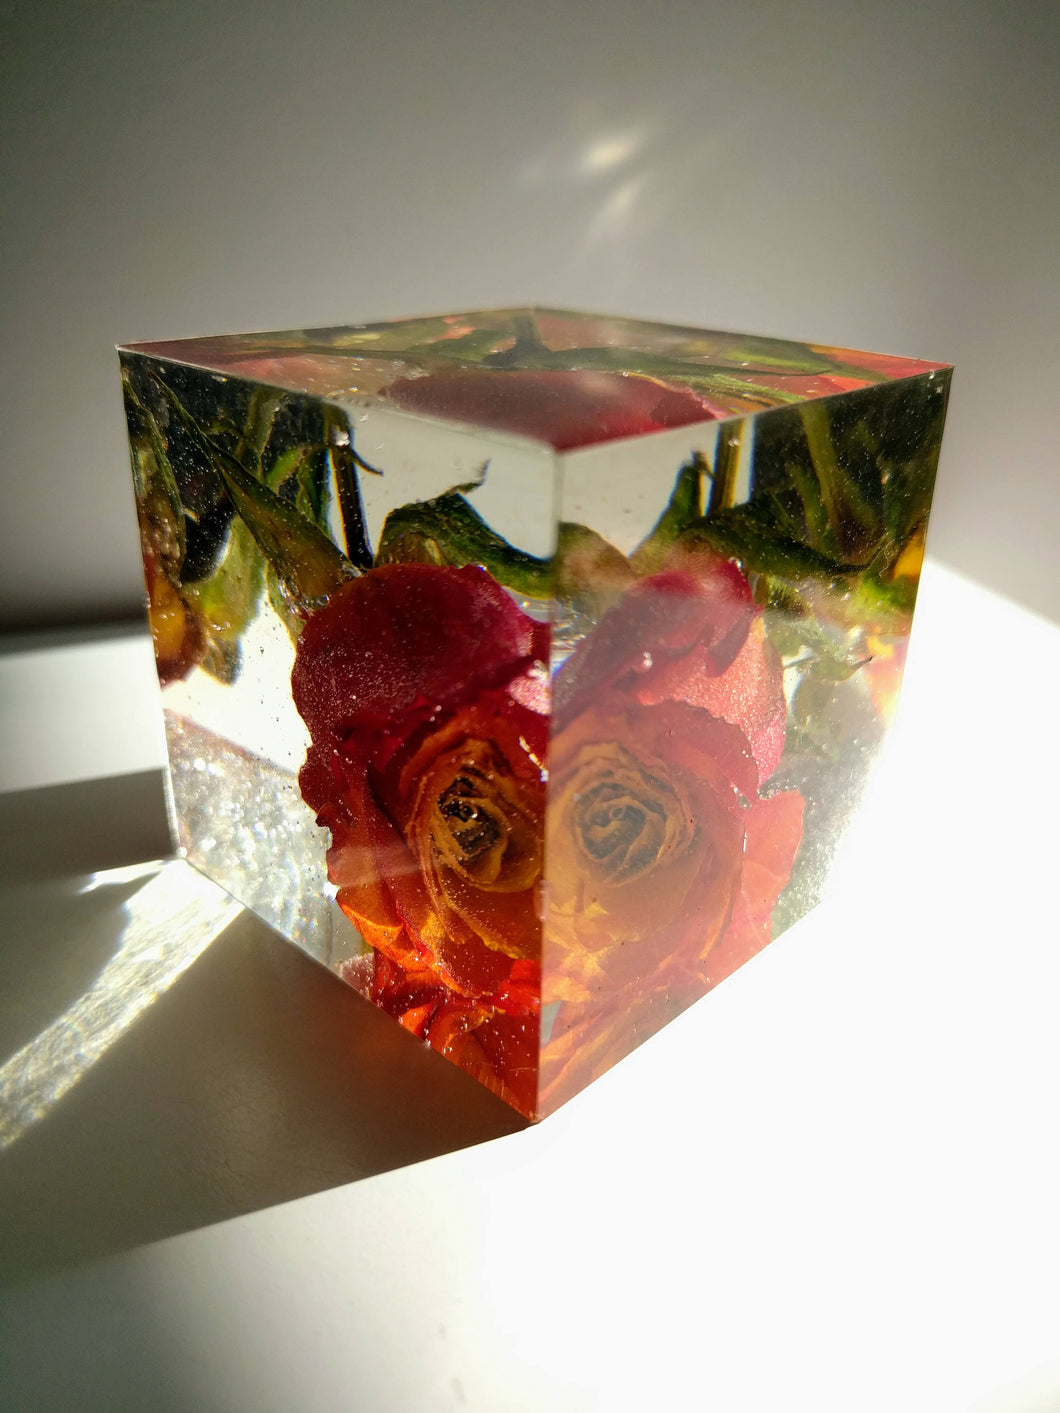 Red Orange Flowers Rose in cube keepsake paperweight NATURAL GIFT. Rose Paperweights. Home Office Deck Decor.Gift.Glass like.Crystals